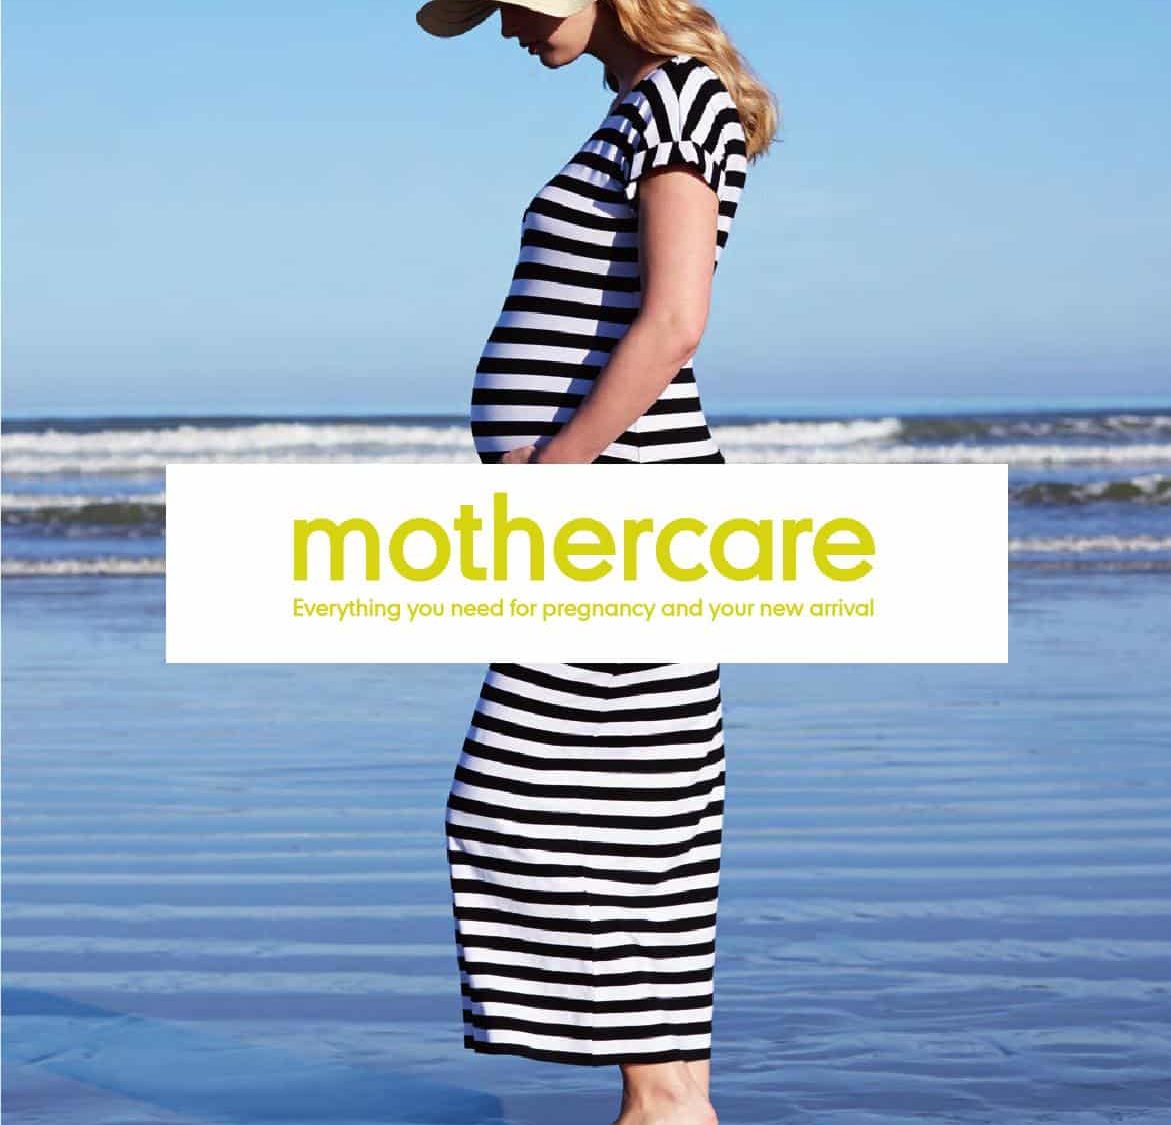 Mothercare posts improved results